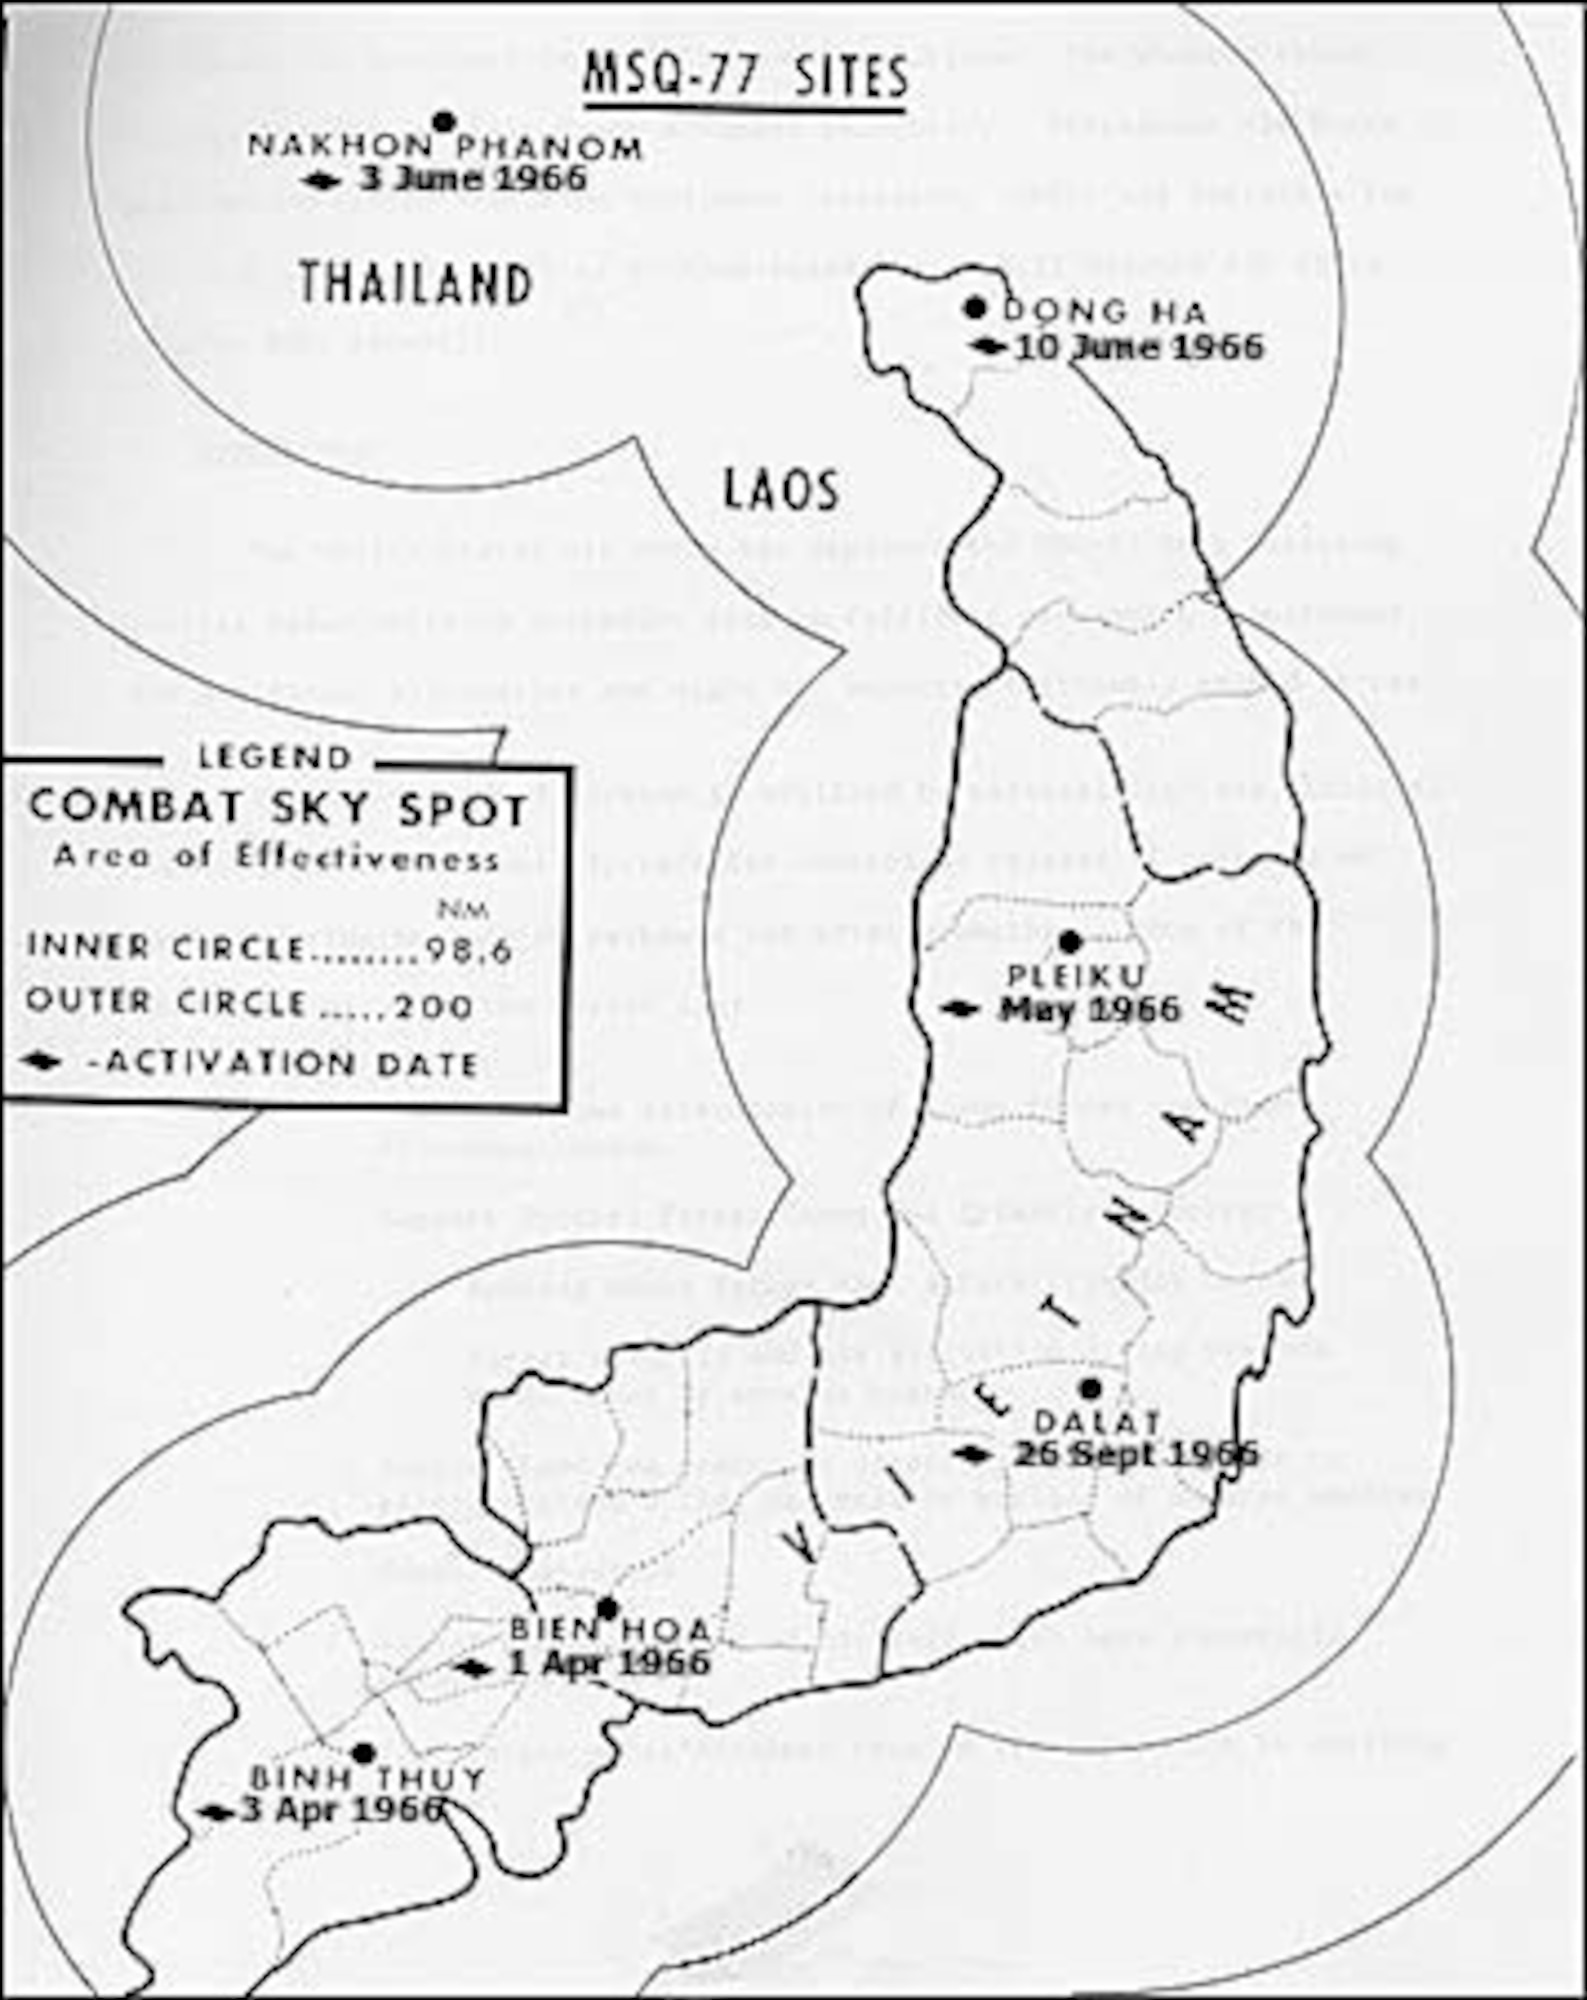 With a maximum range of about 230 miles, COMBAT SKY SPOT radars covered most areas of interest, with the notable exception of northern North Vietnam.  The installation of a modified COMBAT SKY SPOT site on LS 85 in 1967 covered this gap. (U.S. Air Force photo)